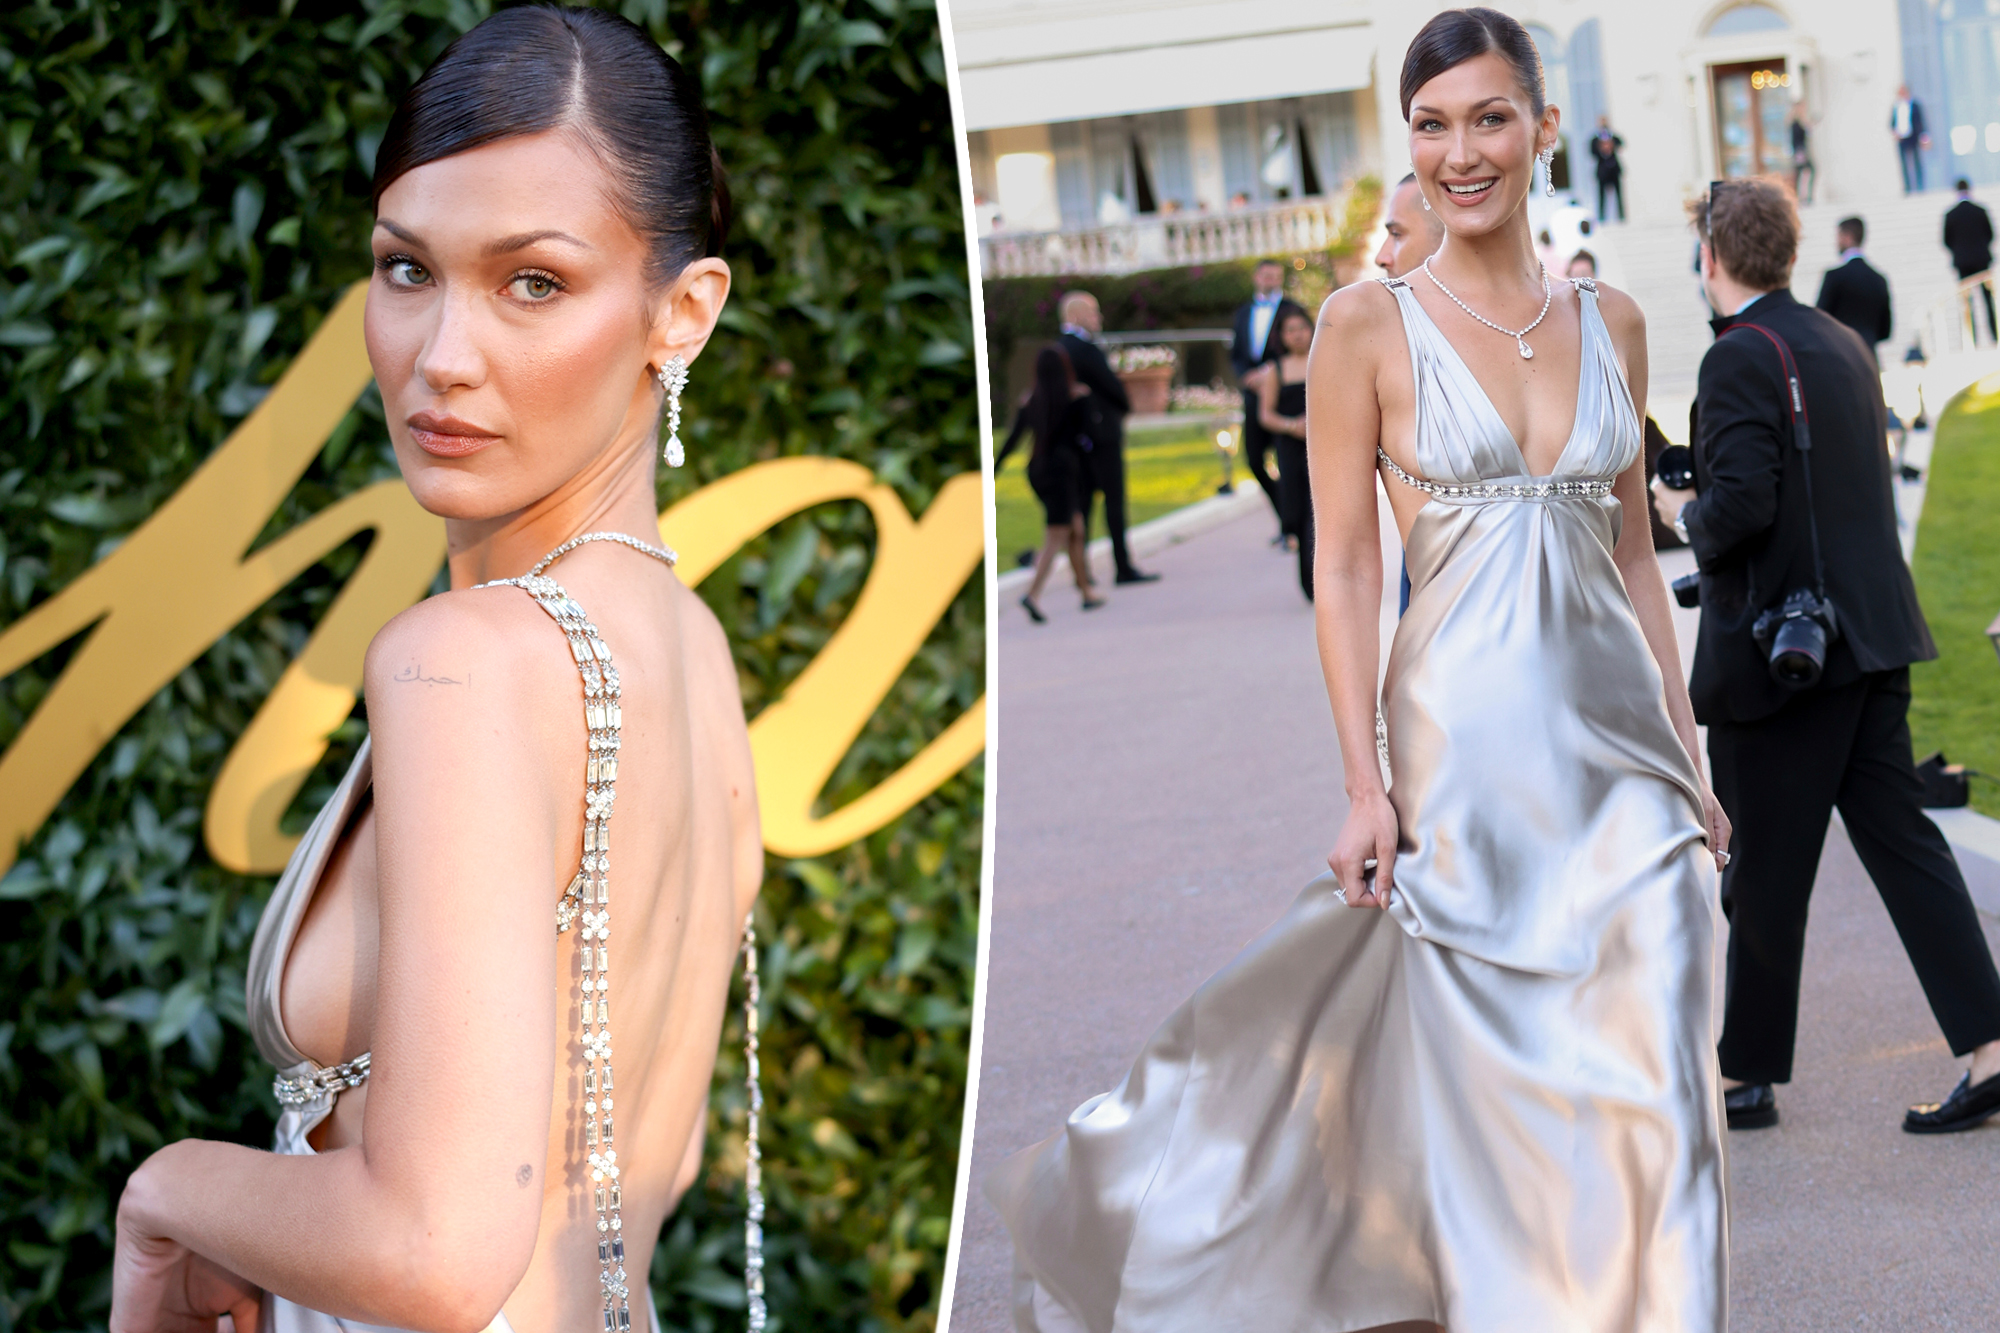 Bella Hadid Shines at Cannes in Stunning Backless Dress